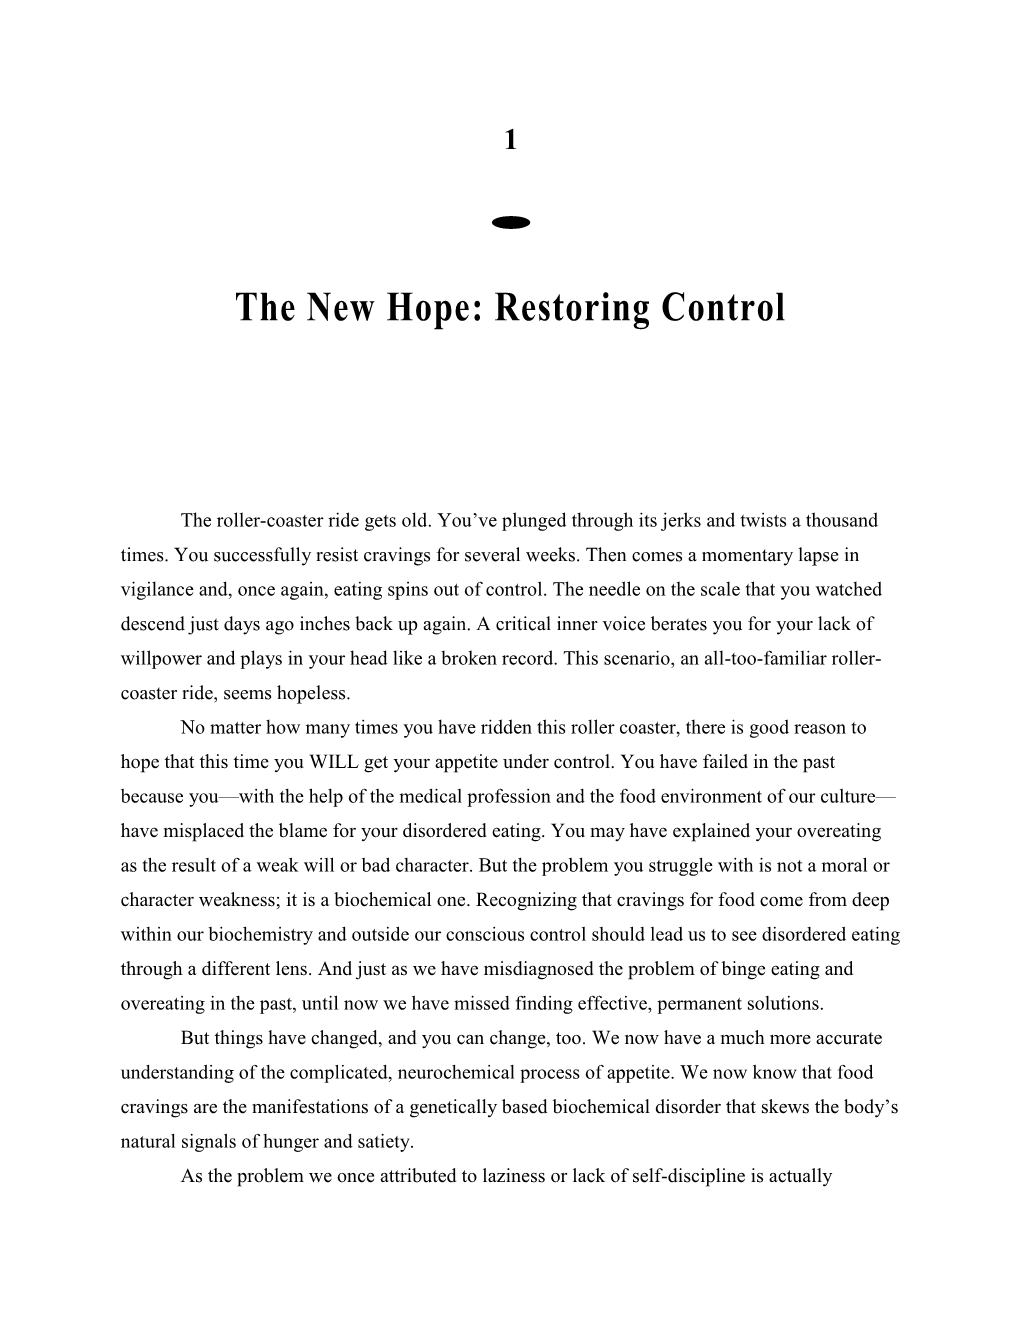 The New Hope: Restoring Control